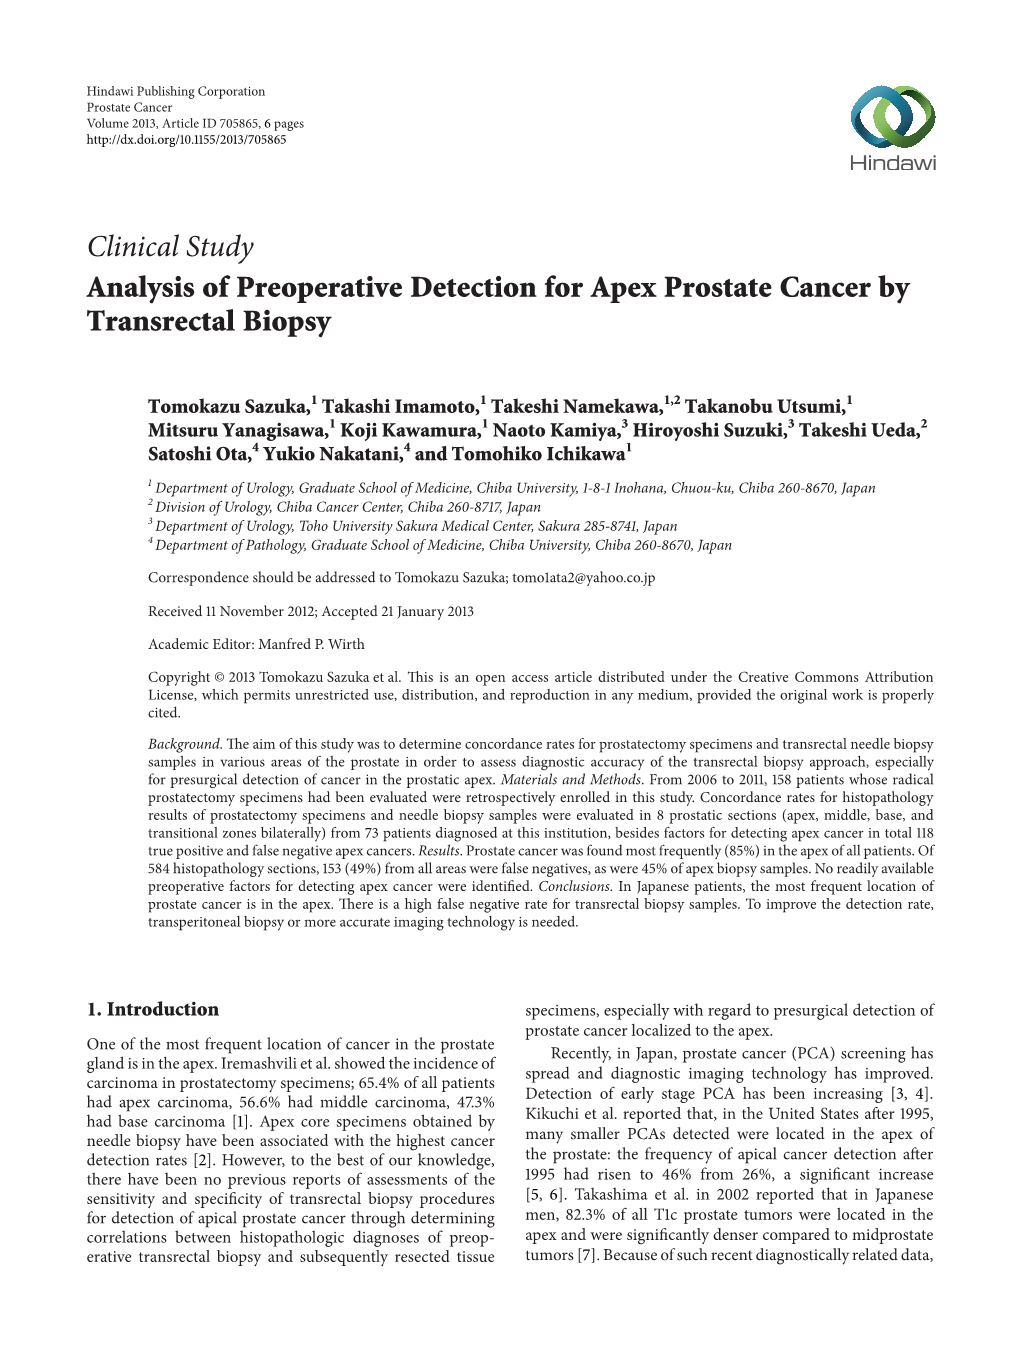 Clinical Study Analysis of Preoperative Detection for Apex Prostate Cancer by Transrectal Biopsy